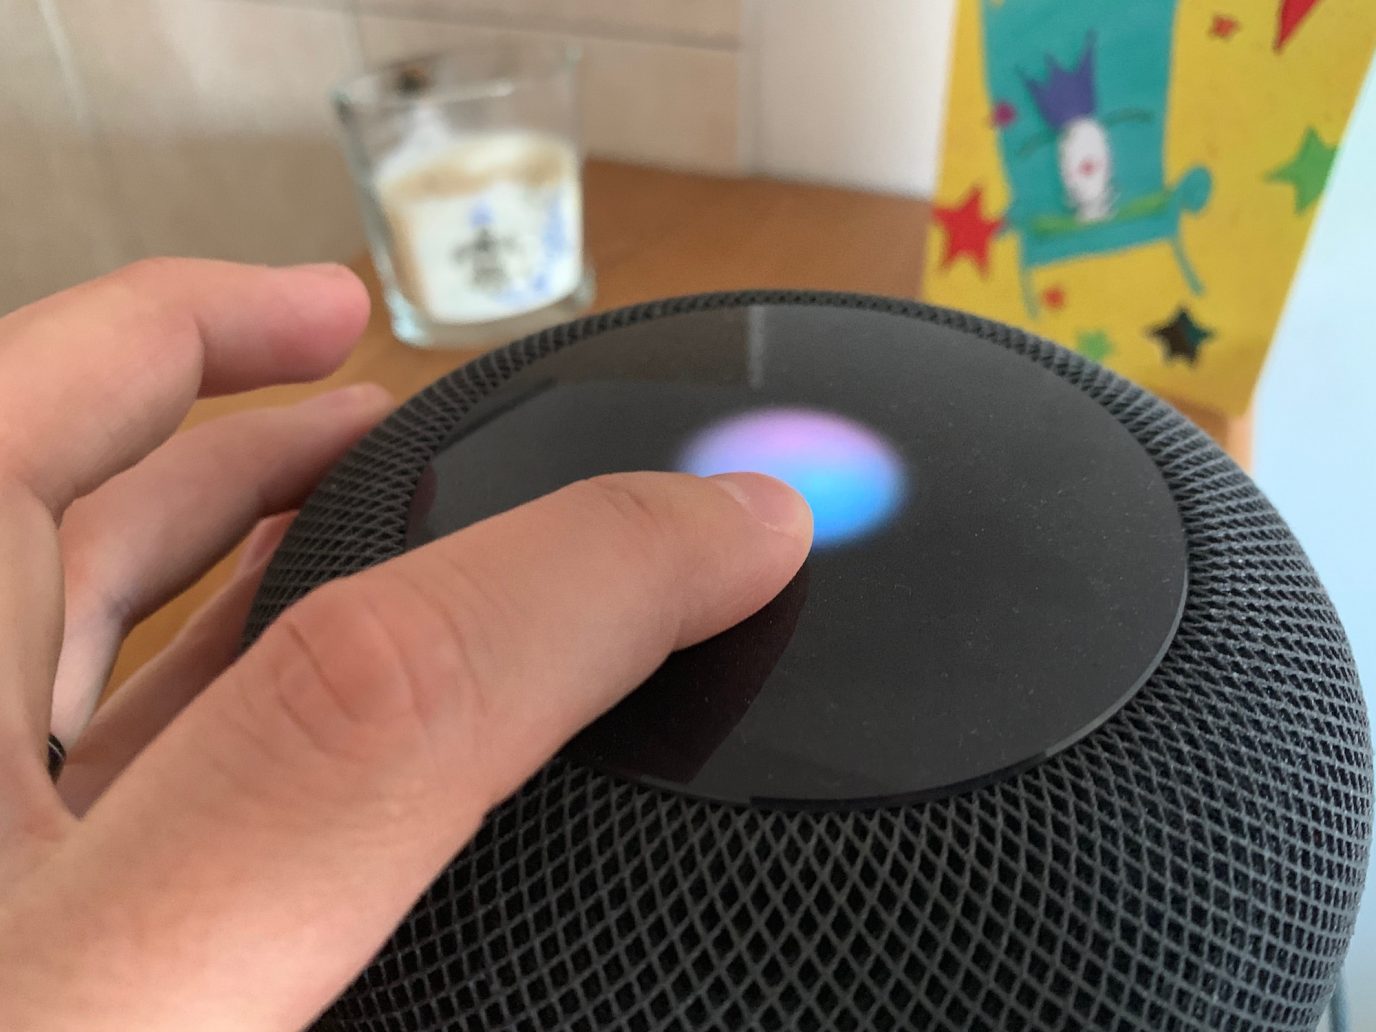 Press-and-Hold - HomePod - 1376 × 1032 